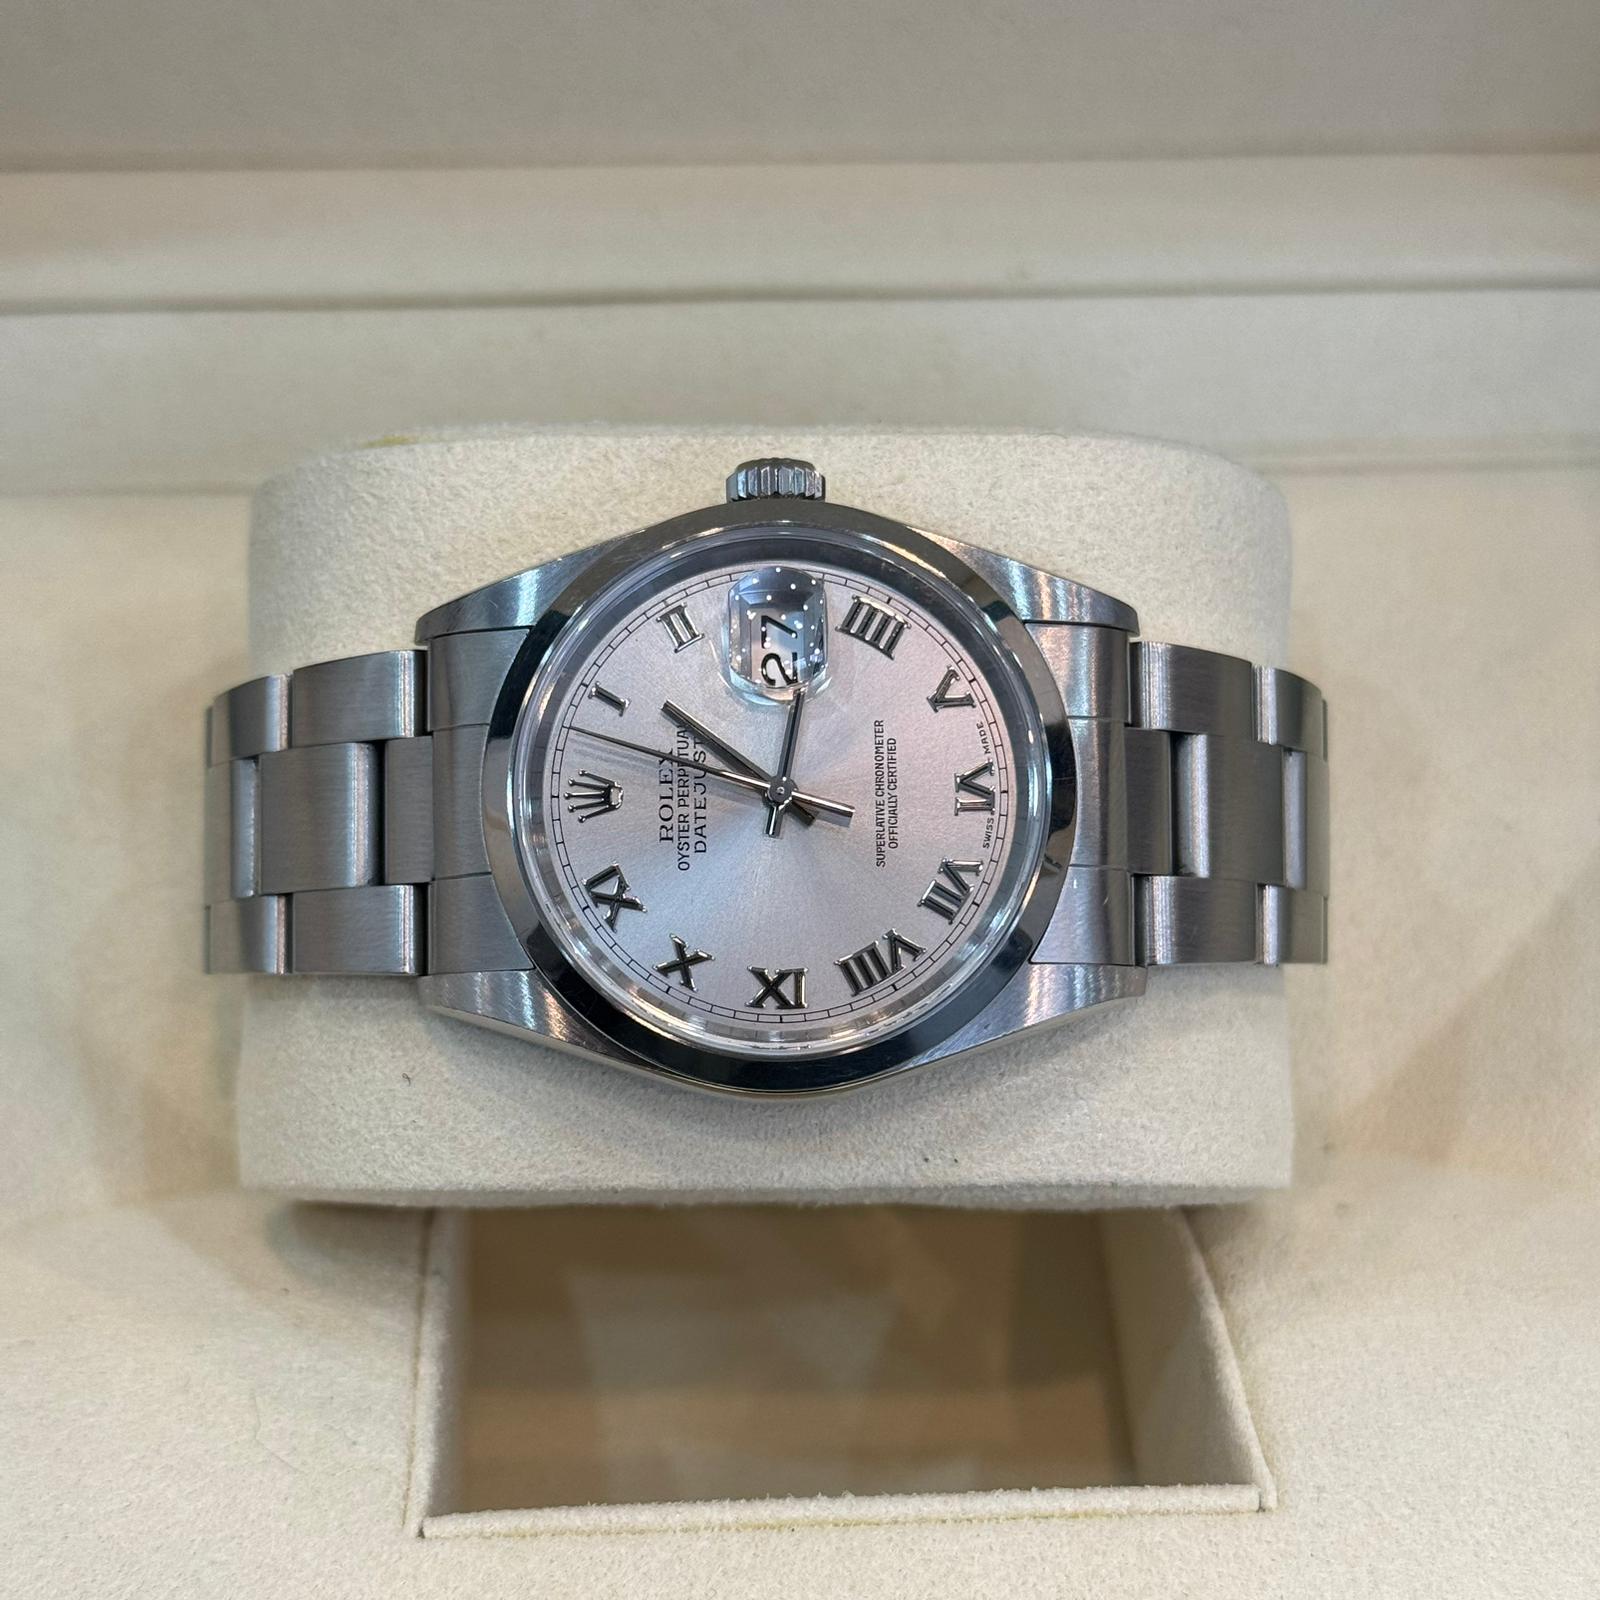 ROLEX DATEJUST 36mm STAINLESS STEEL (BOX & PAPERS) SILVER ROMAN NUMERAL DIAL - Image 3 of 6